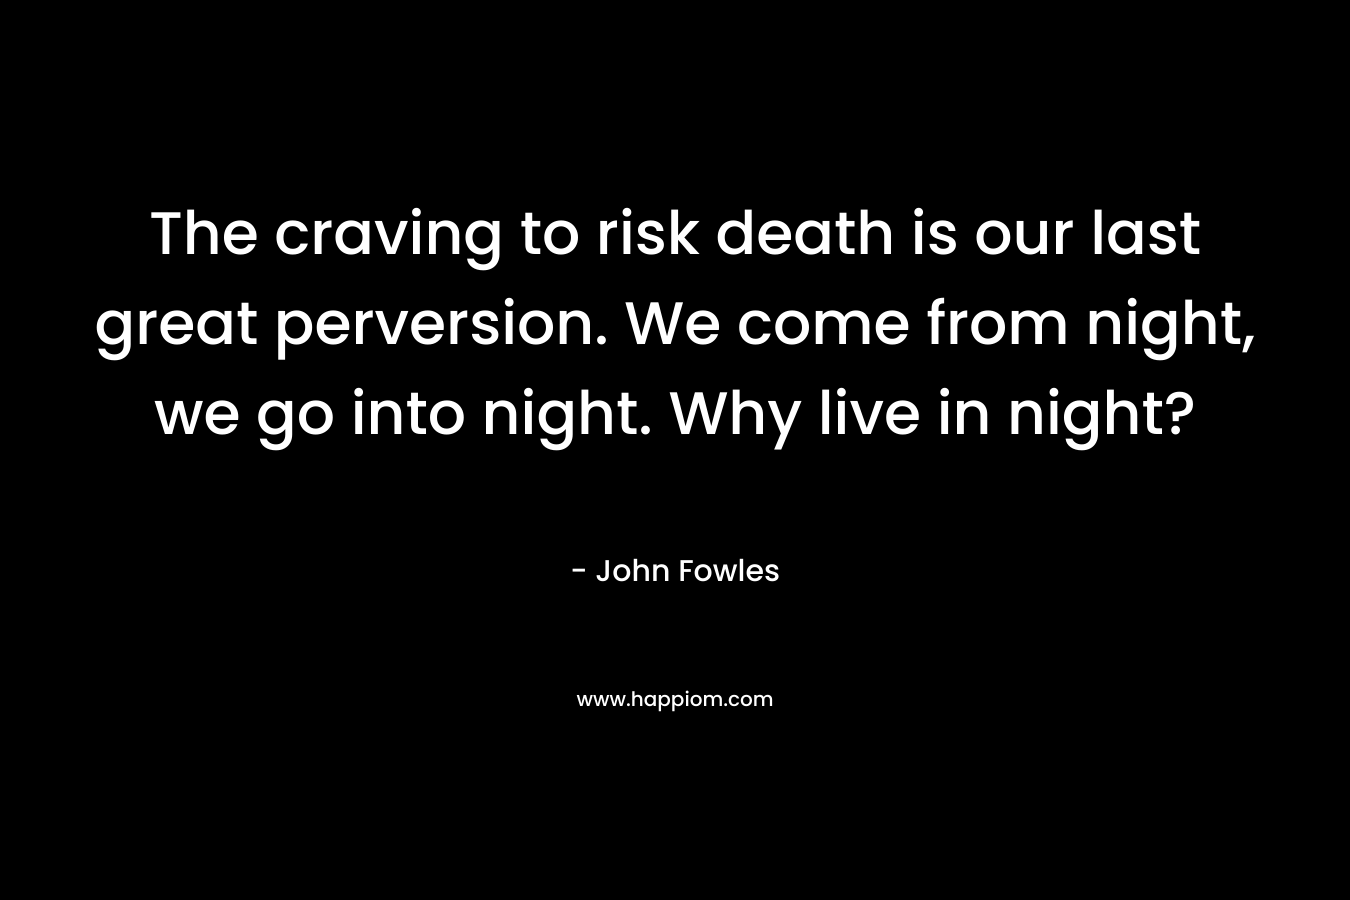 The craving to risk death is our last great perversion. We come from night, we go into night. Why live in night?